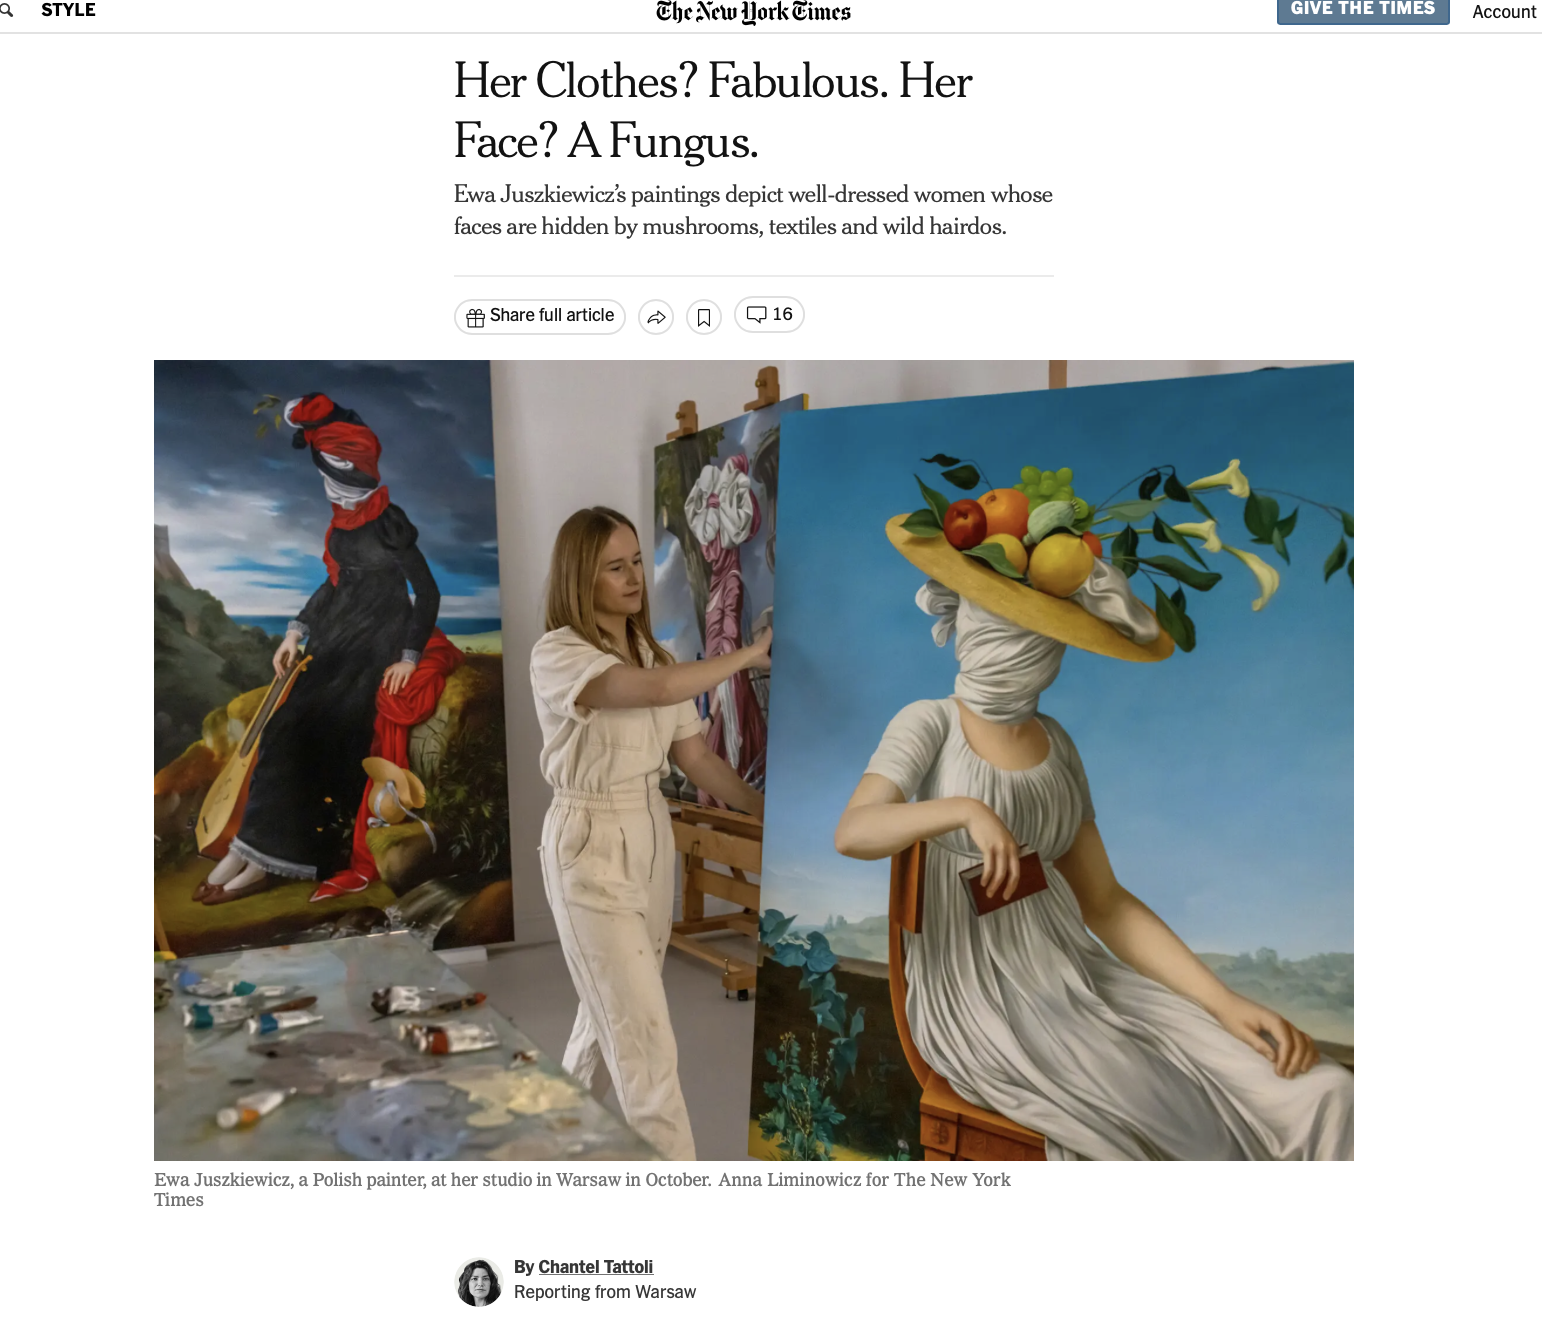 NYTIMES- Her Clothes? Fabulous. Her Face? A Fungus.